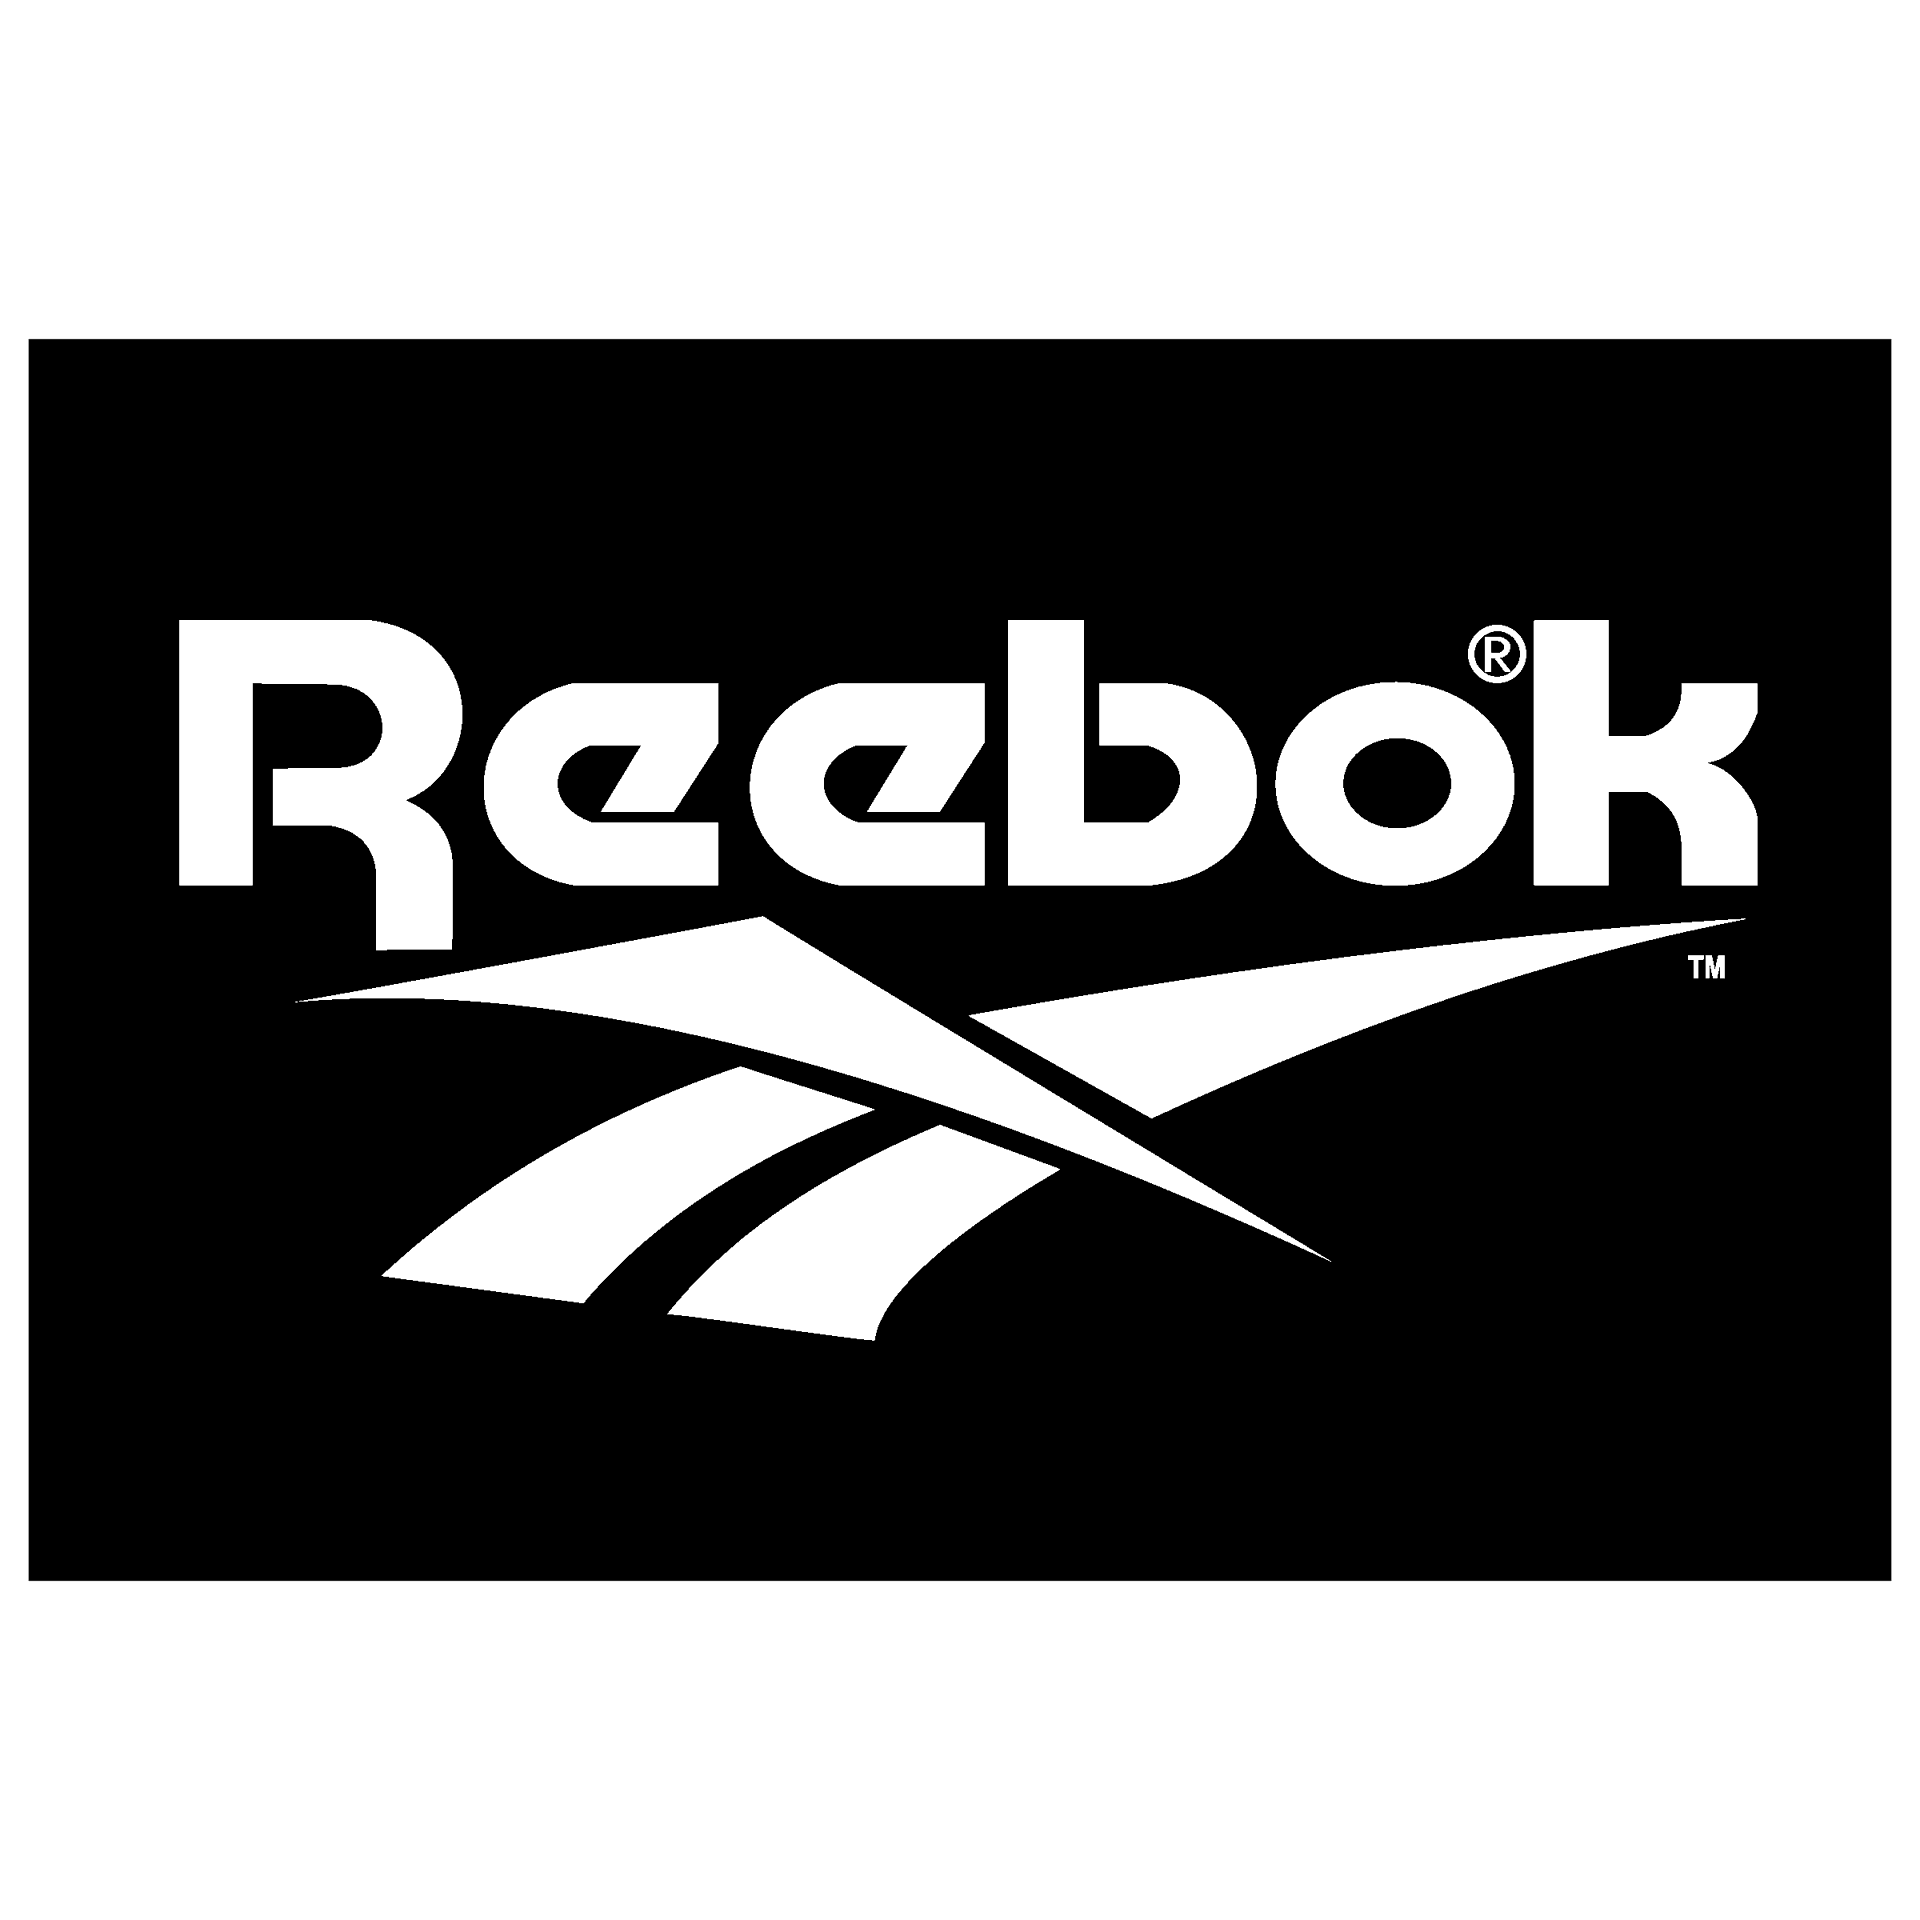 Download Cutting-edge Reebok Sneakers On A Bright Backdrop | Wallpapers.com